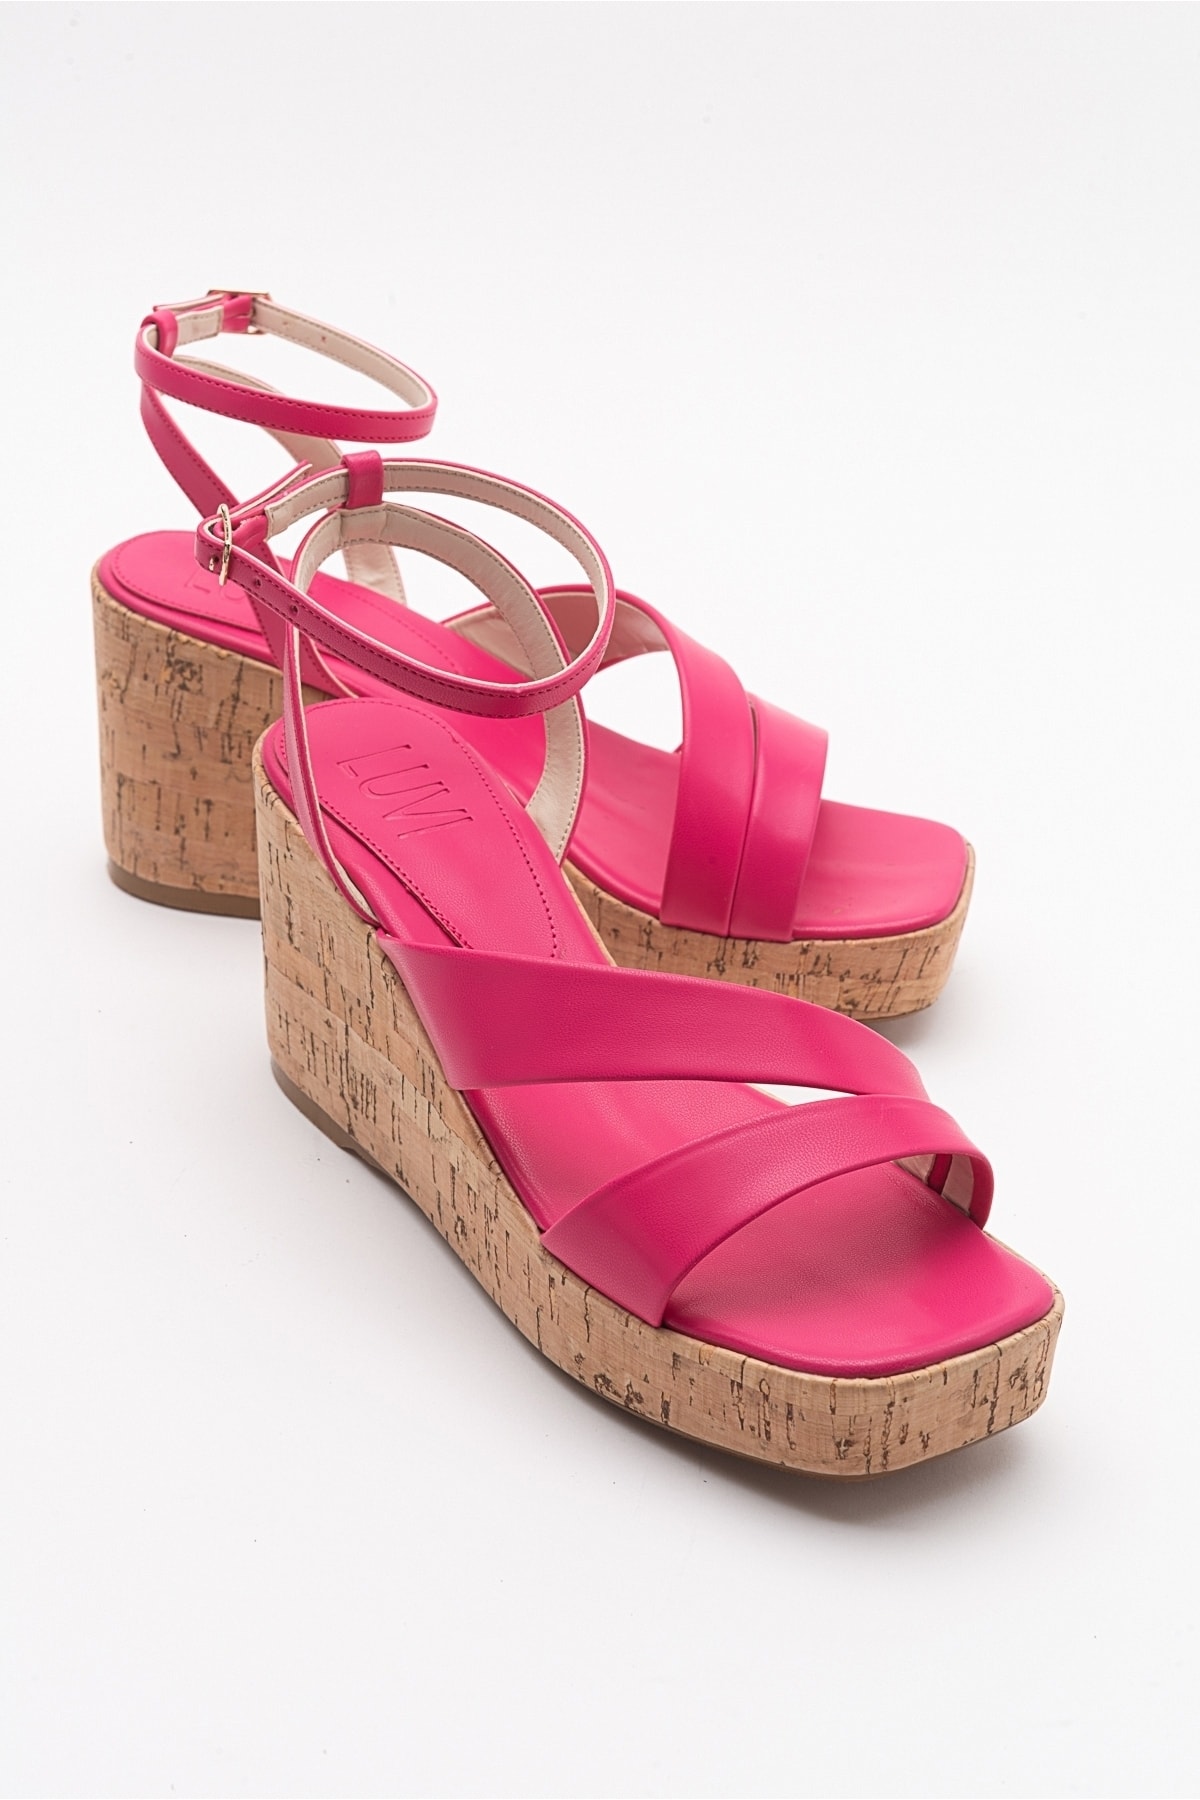 LuviShoes Ductus Fuchsia Women's Sandals with Filling Soles